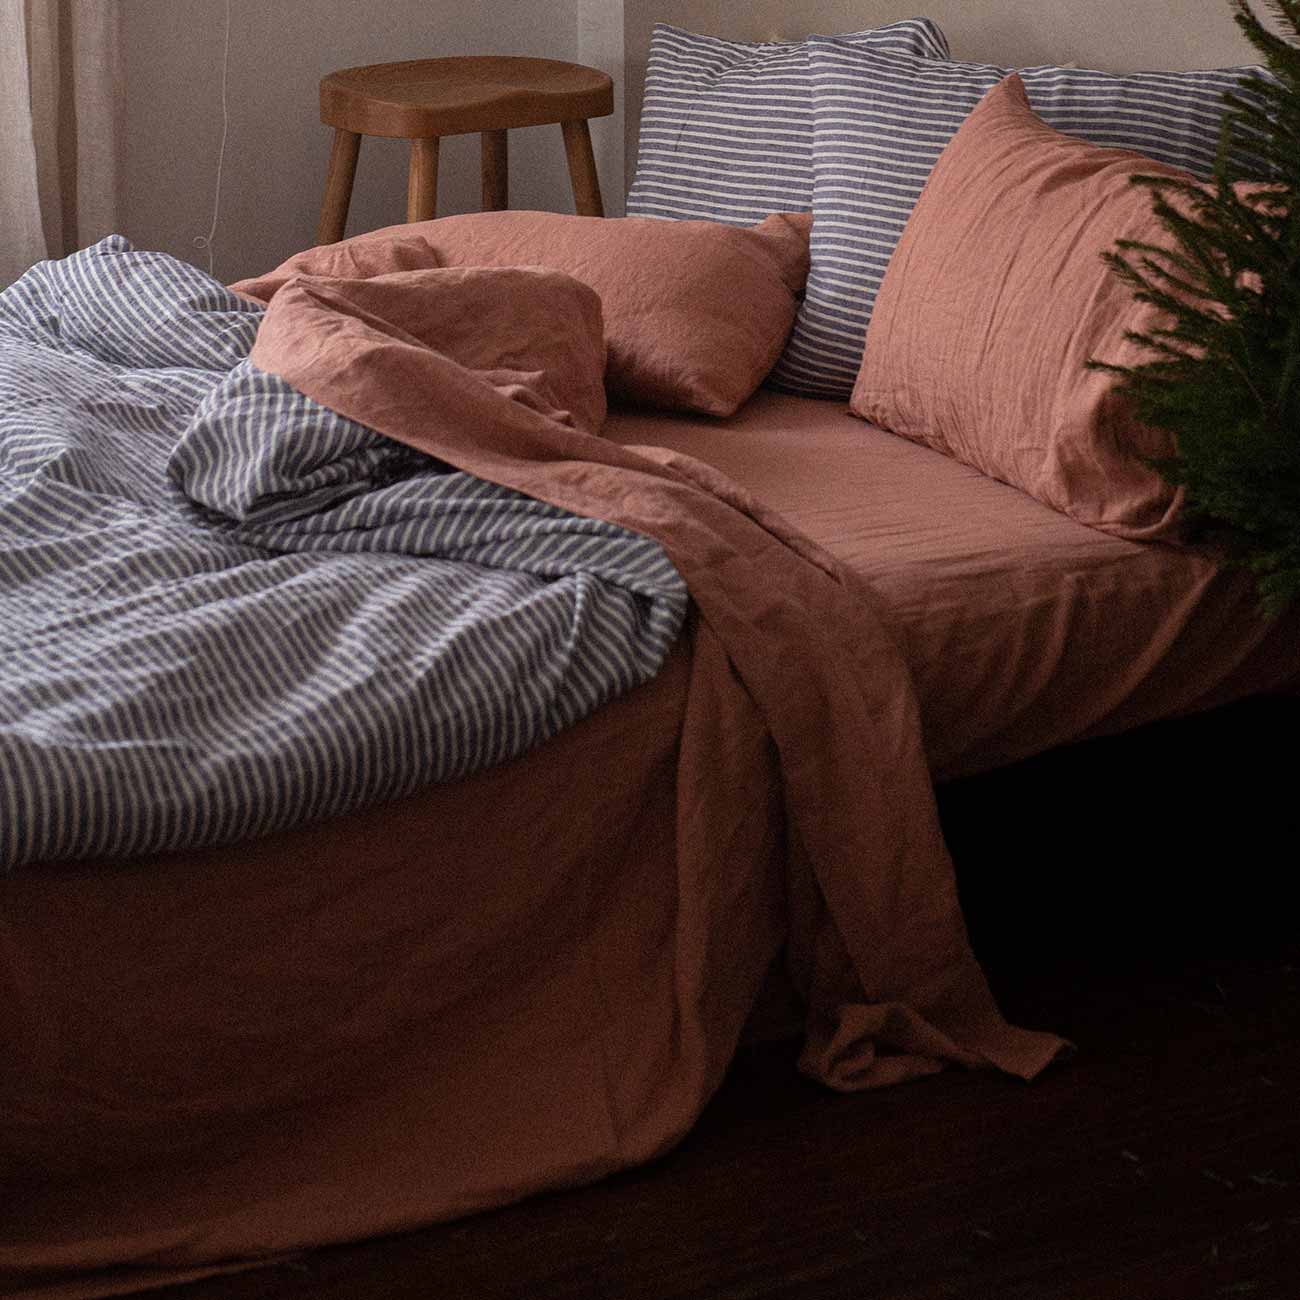 Warm Clay Sheets and Pillowcases with Midnight Stripe Bedding